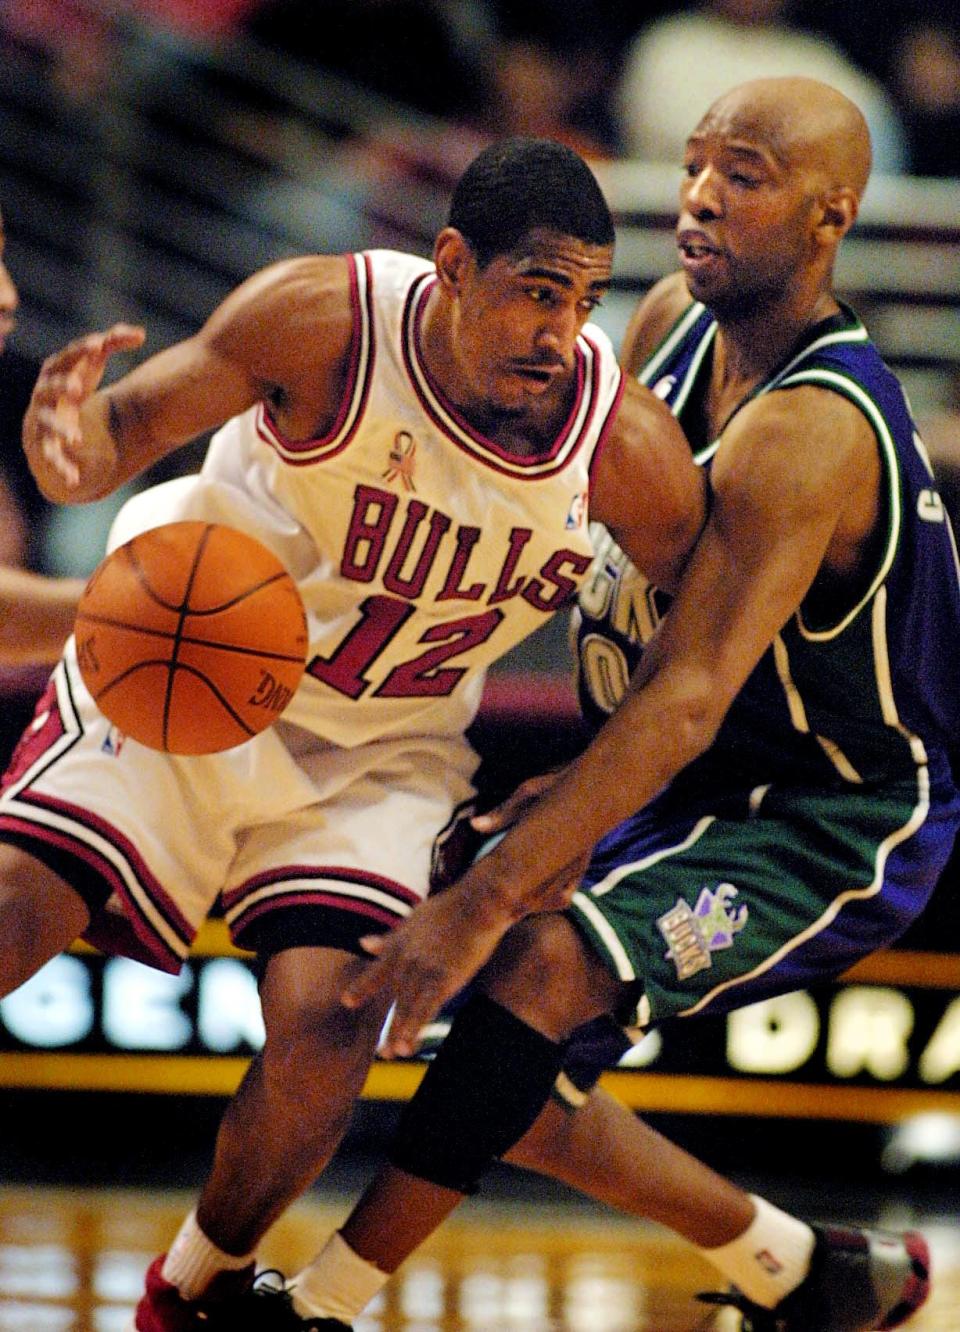 Chicago Bulls guard Kevin Ollie has the ball poked loose by Milwaukee Bucks guard Sam Cassell in the first quarter Feb. 12, 2002 at the United Center in Chicago.